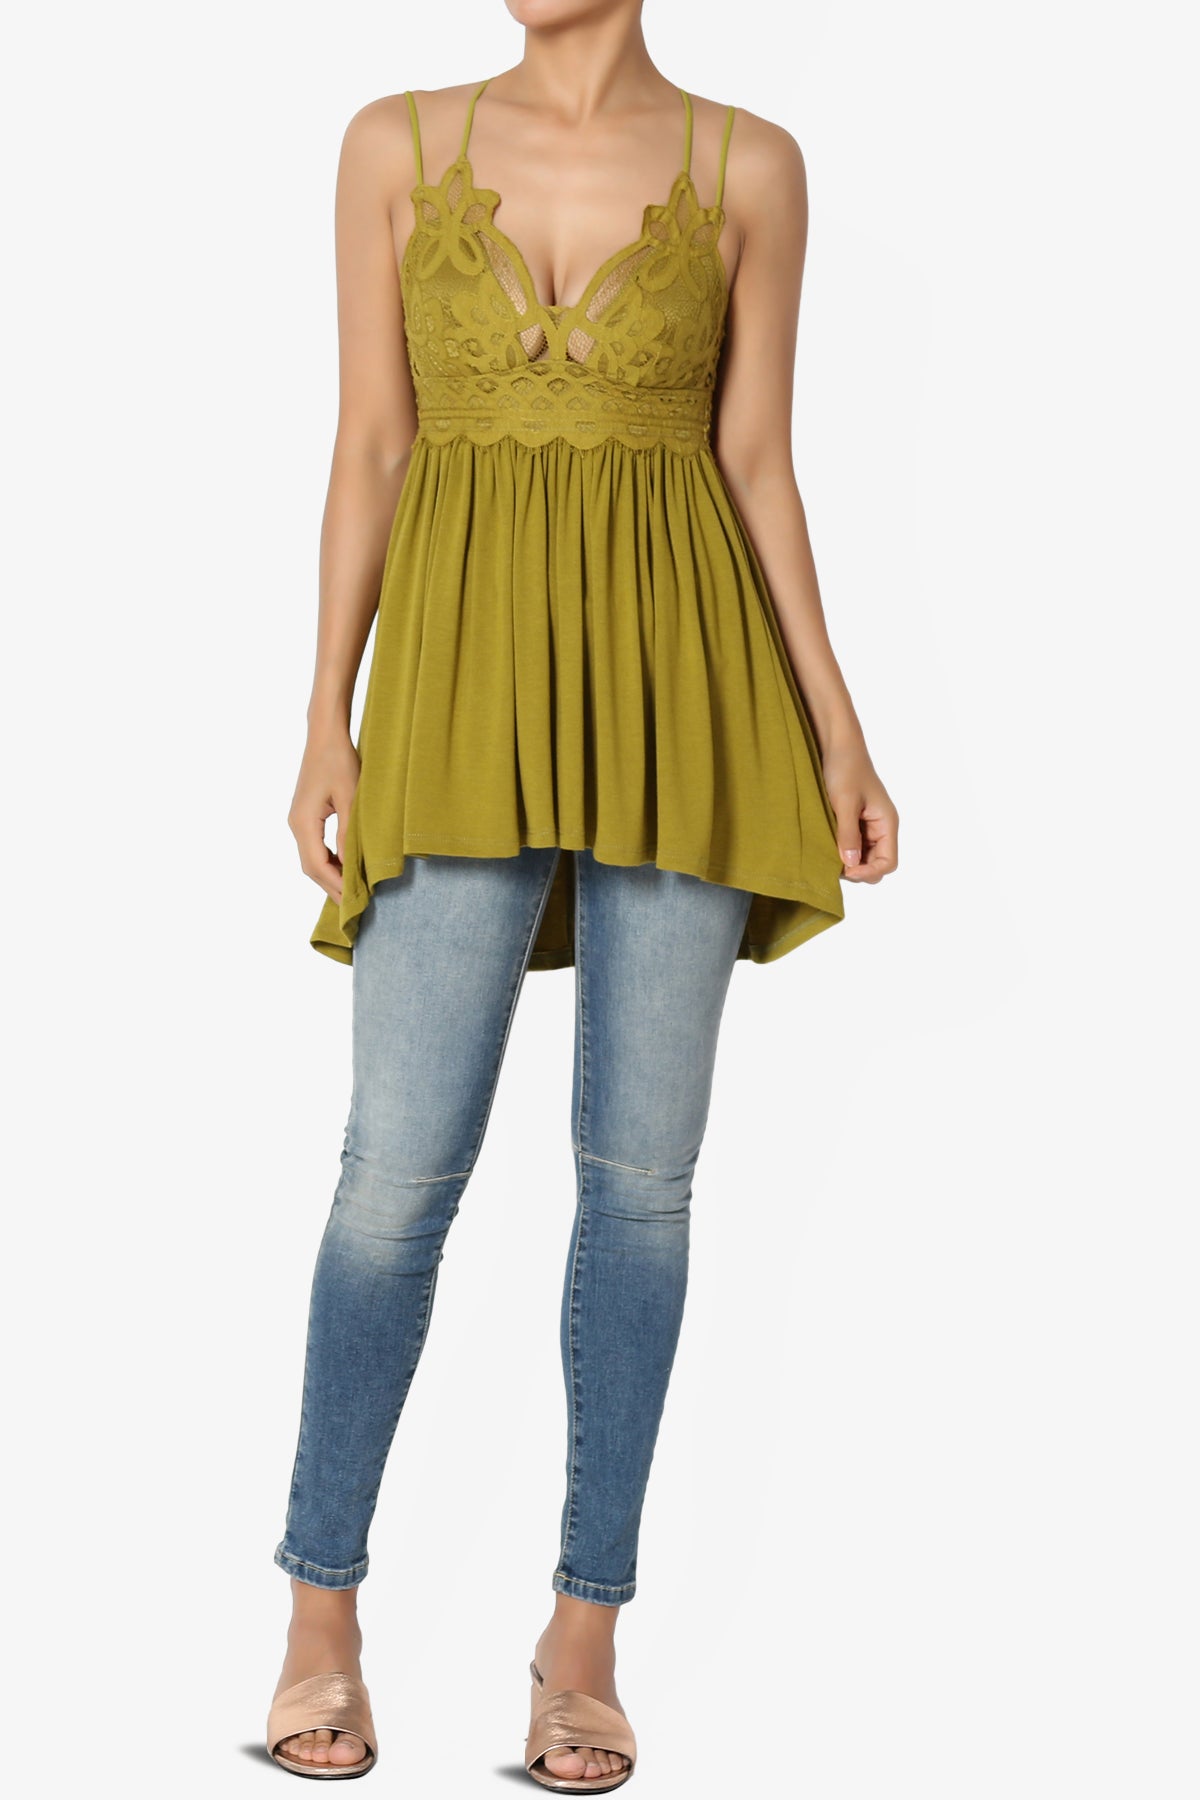 Lynden Crochet Lace Jersey Tunic Cami PLUS